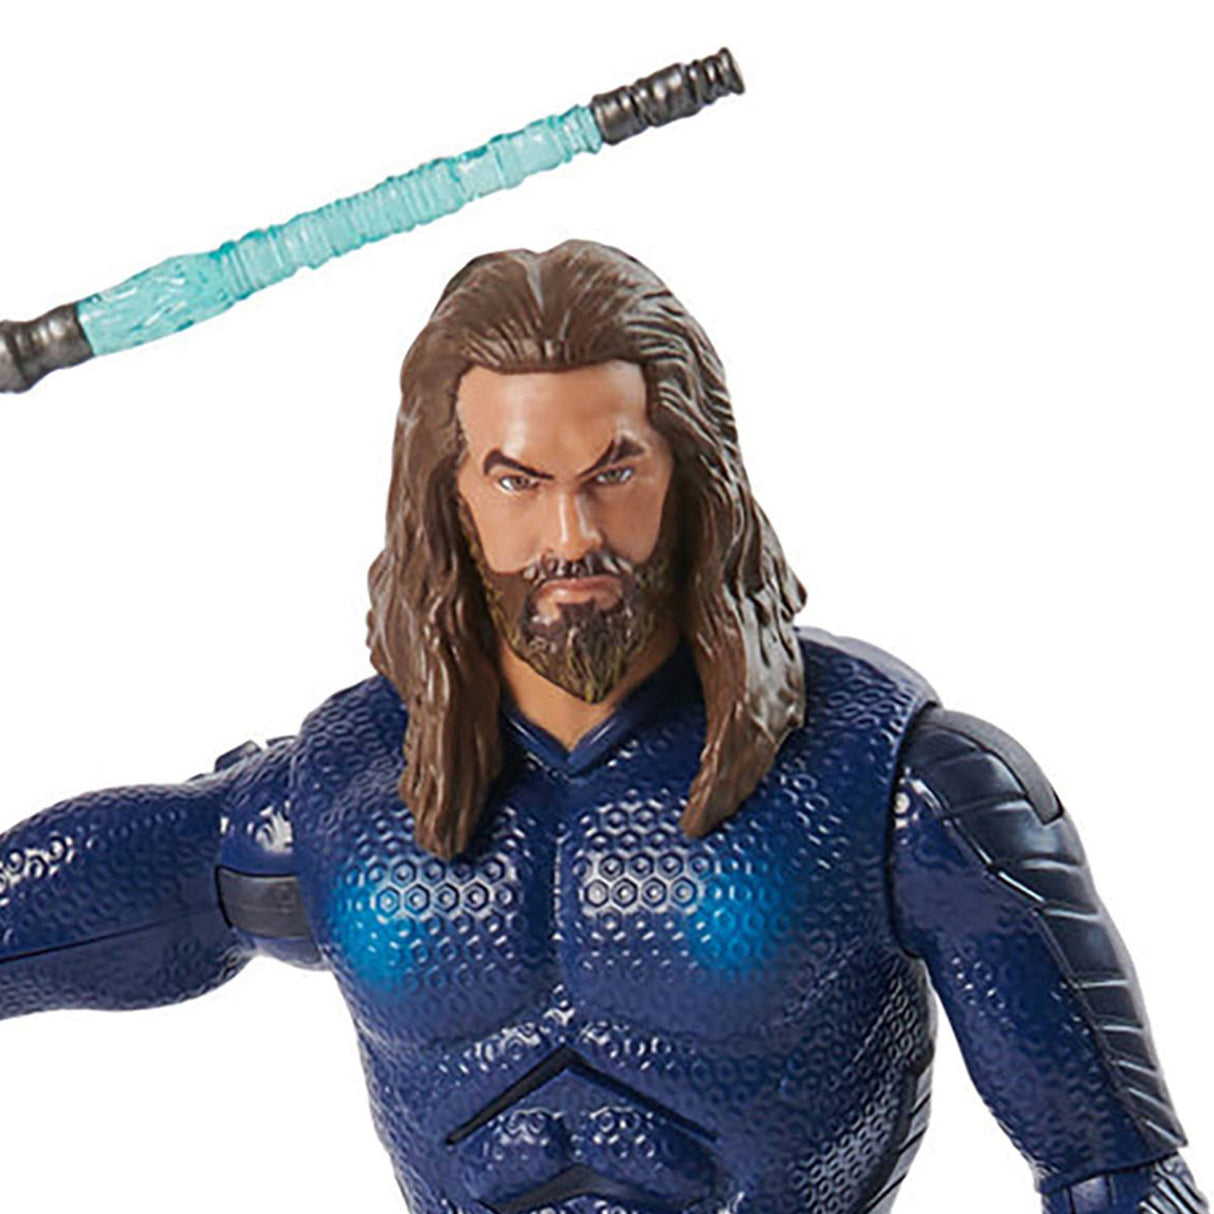 DC Aquaman Double Strike Action Figure (12 inches)